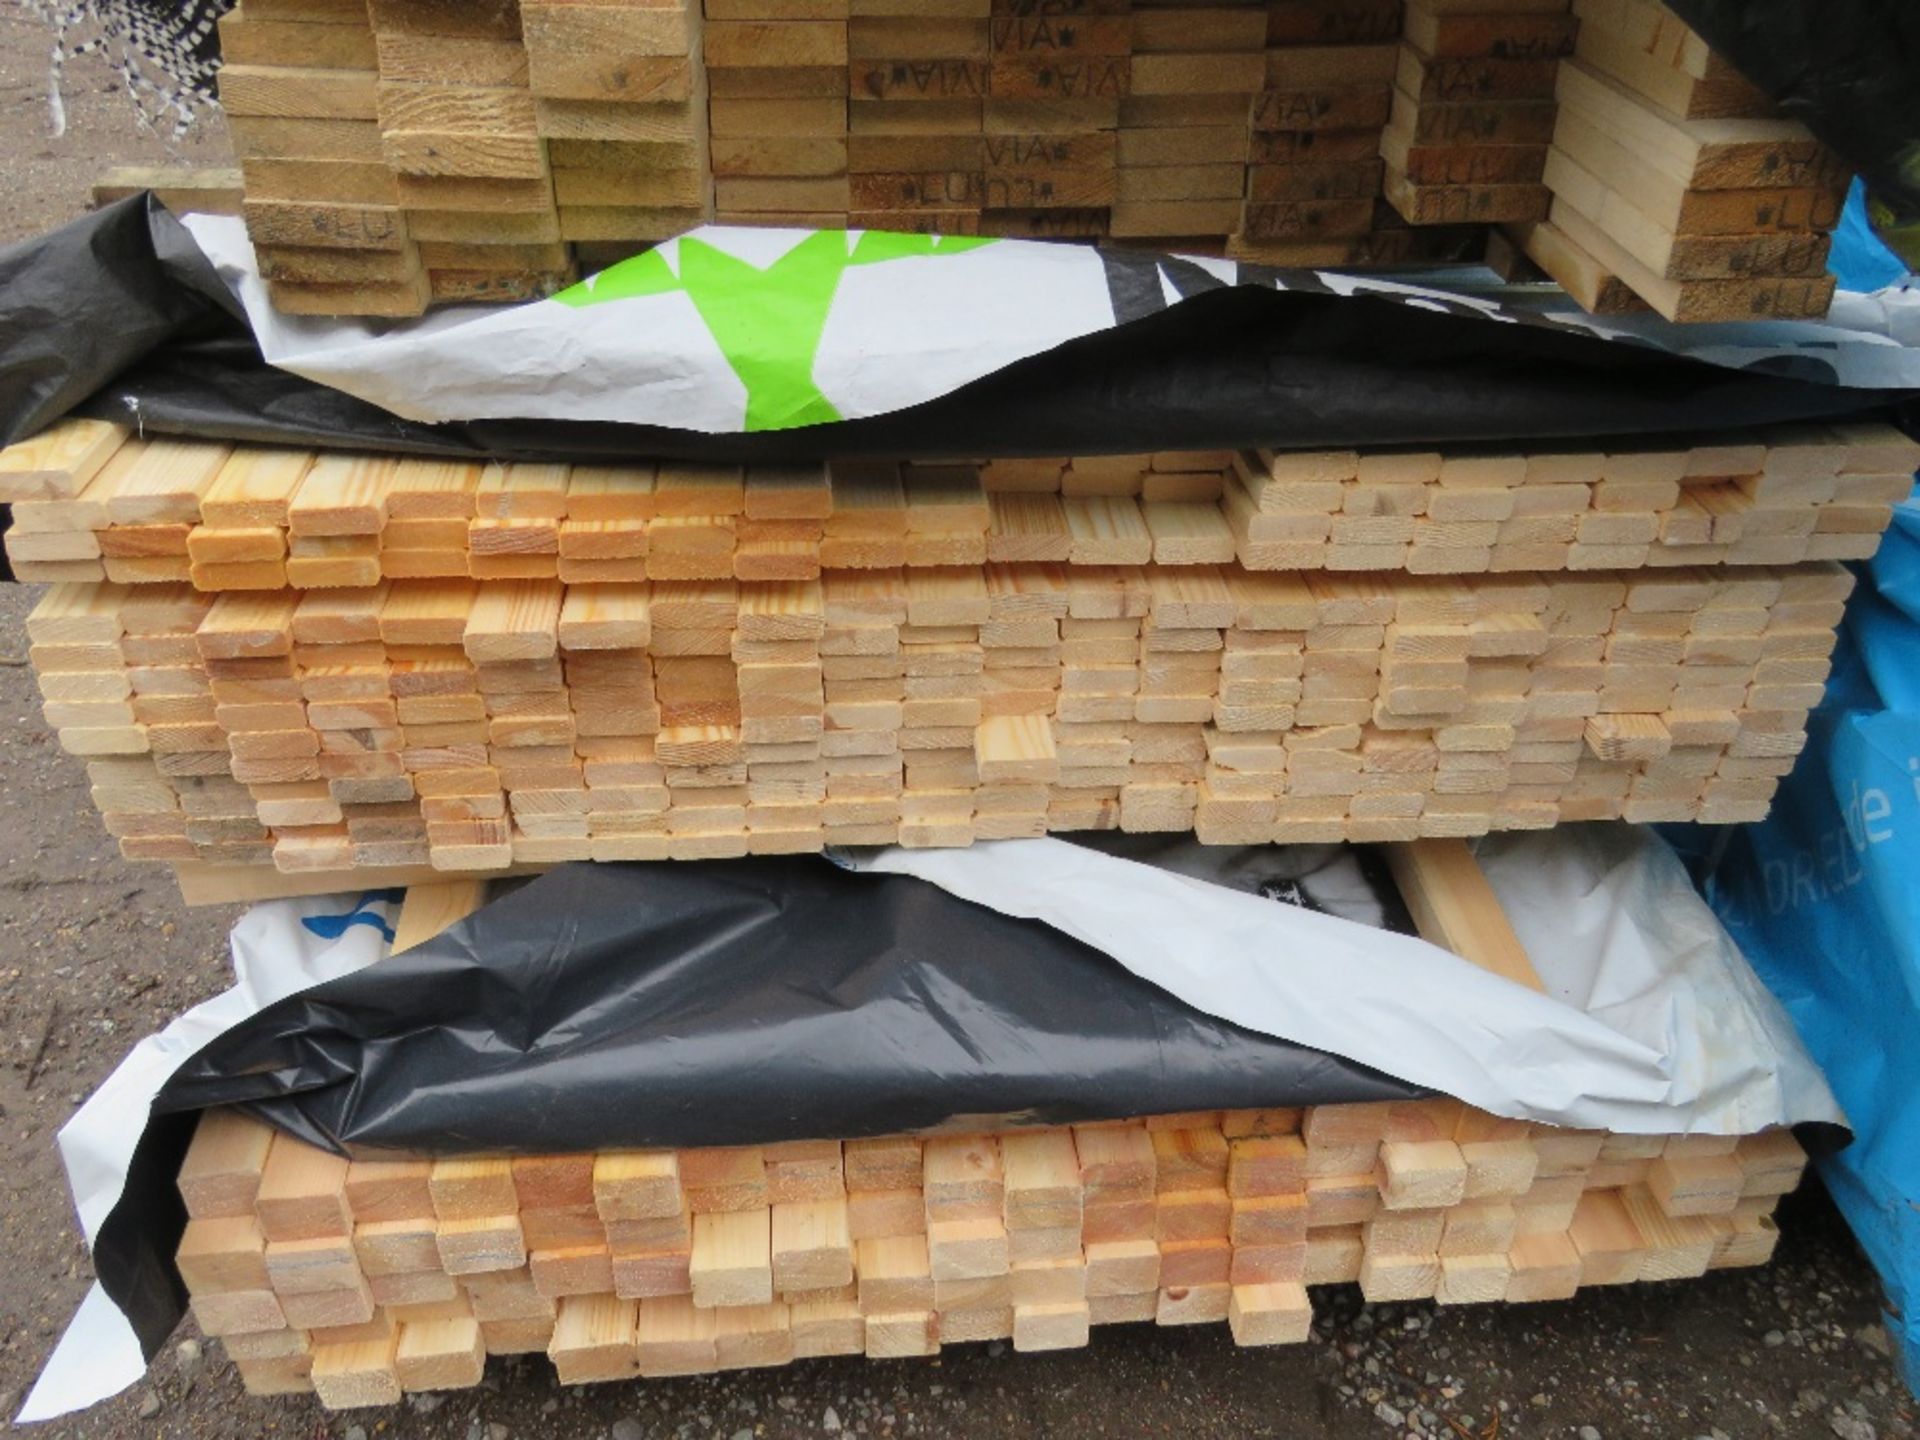 STACK OF 4 SMALL BUNDLES OF ASSORTED FENCING TIMBERS, 1.8M LENGTH APPROX. - Image 4 of 6